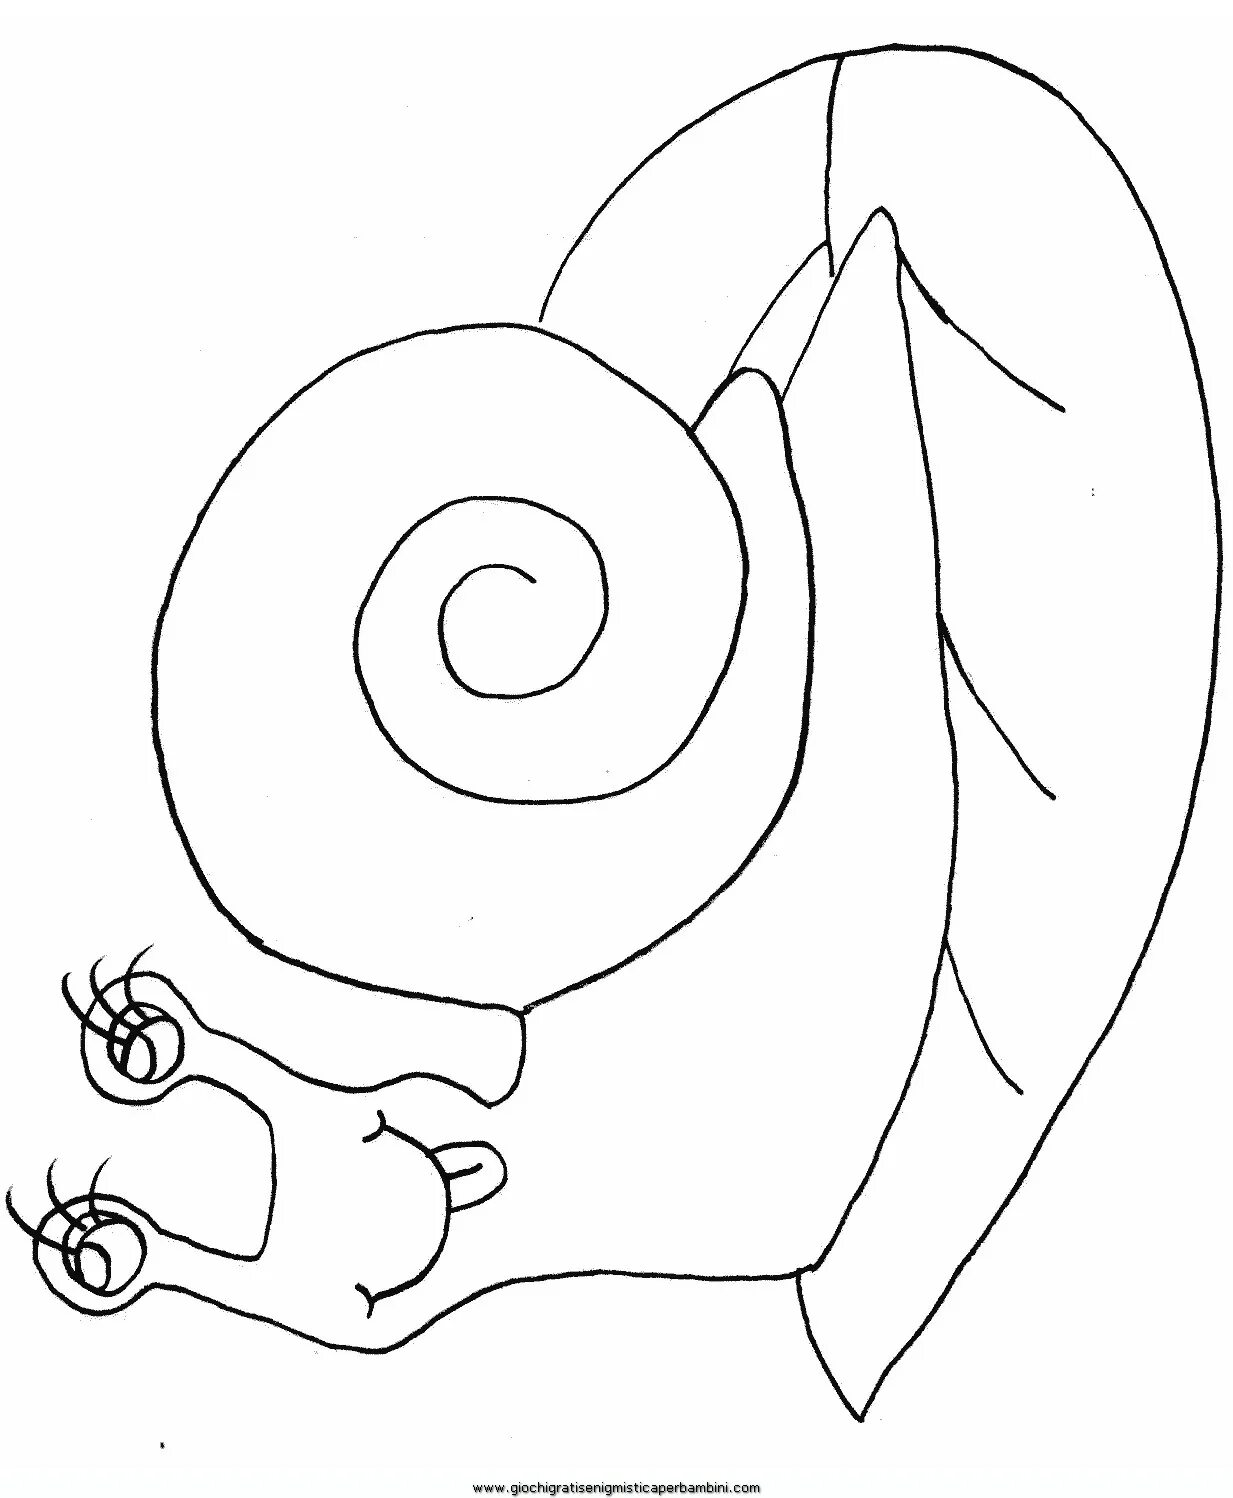 Color-frenzy snail coloring book for children 3-4 years old